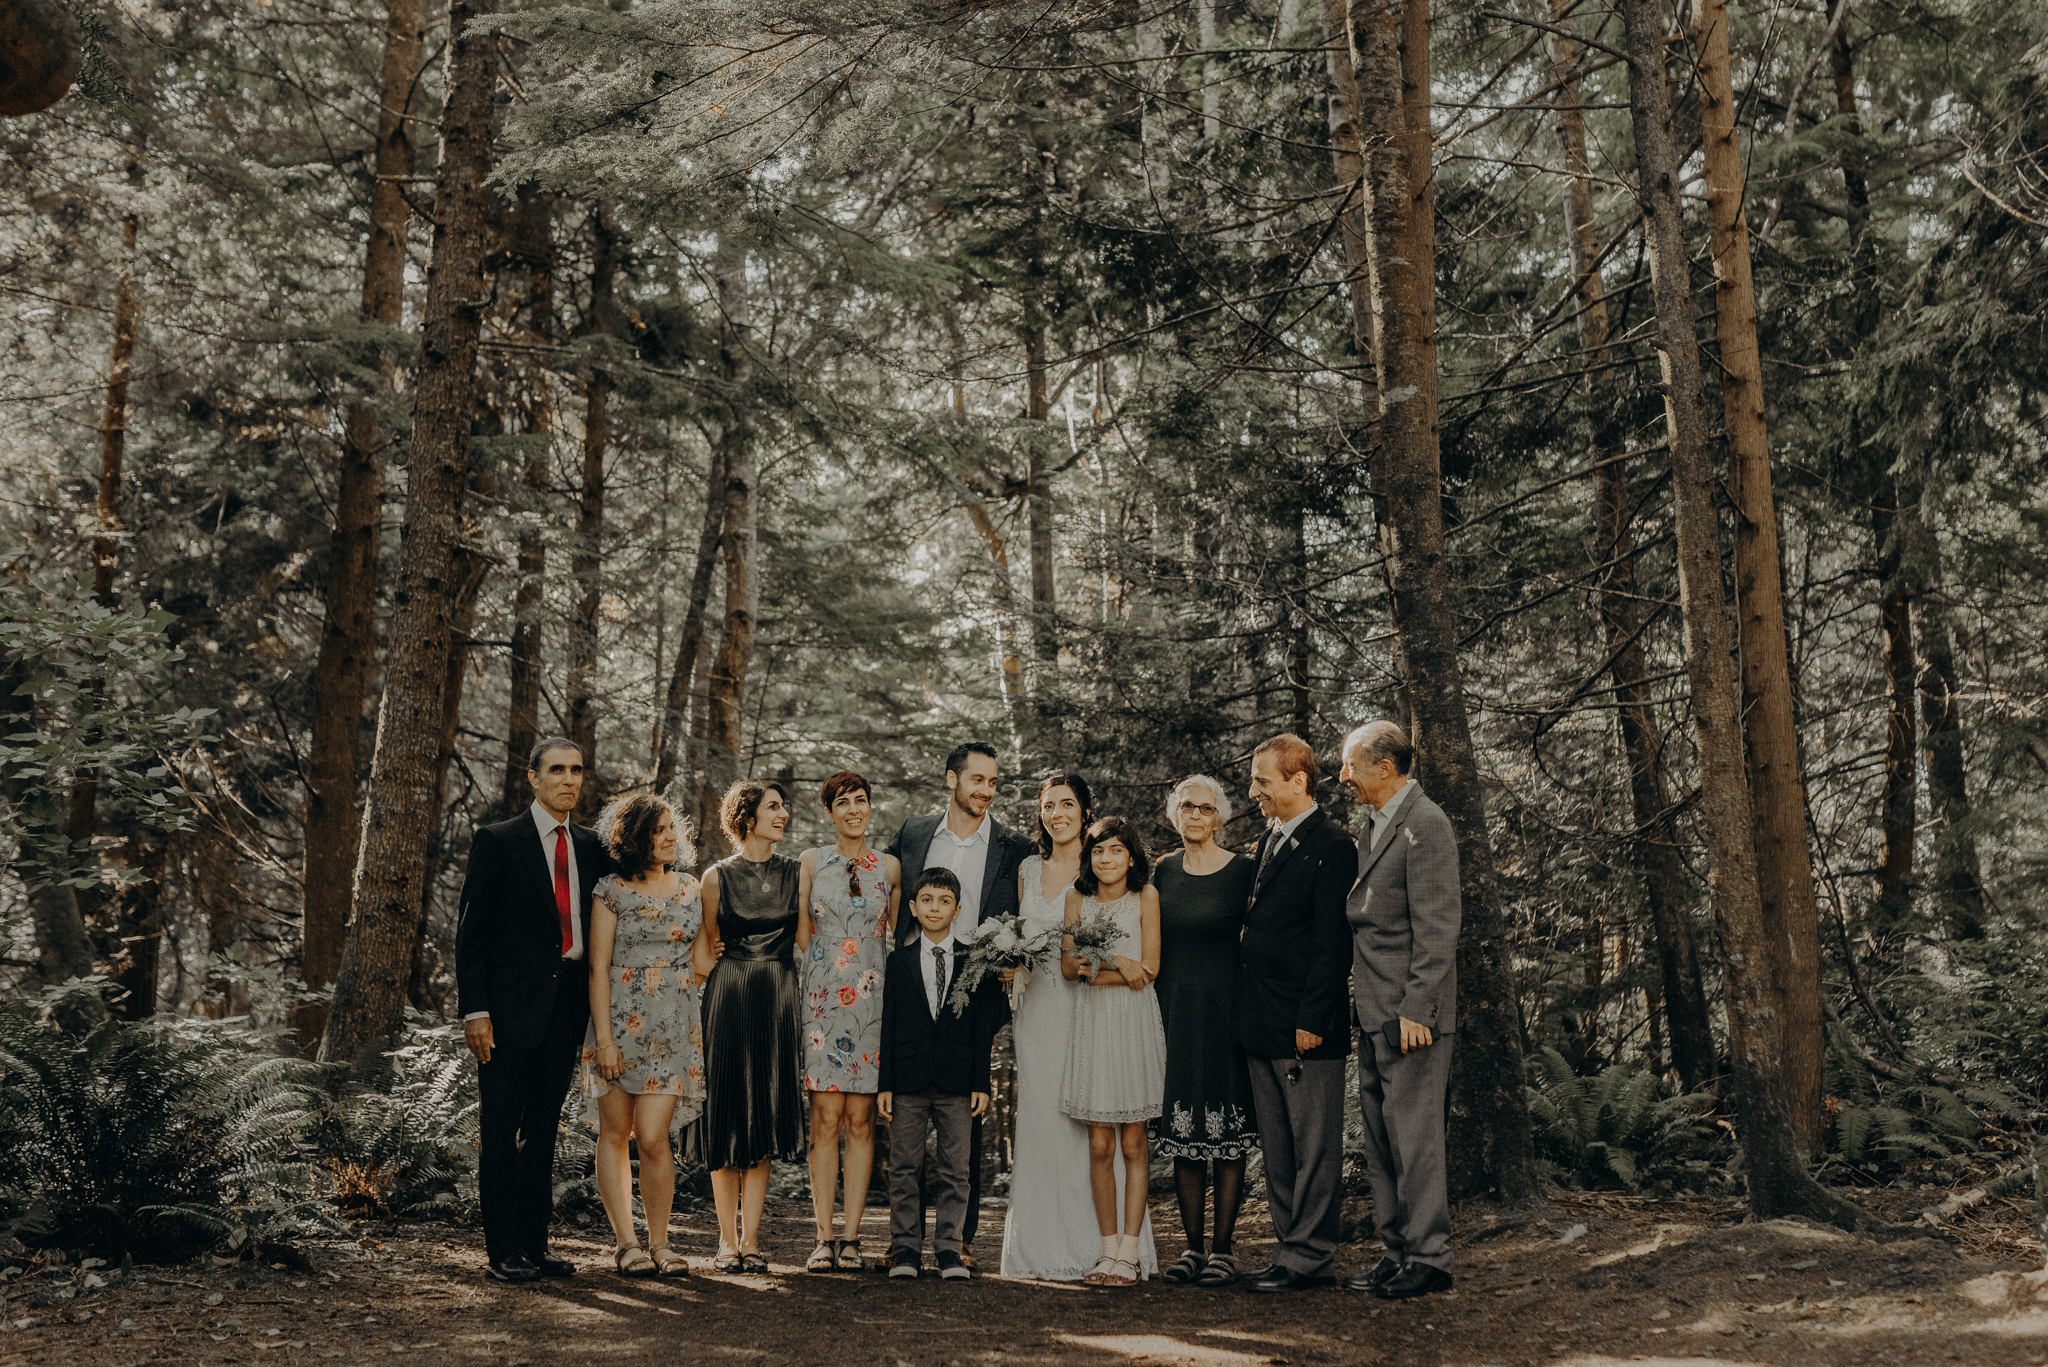 Isaiah + Taylor Photography - Cape Flattery Elopement, Olympia National Forest Wedding Photographer-030.jpg